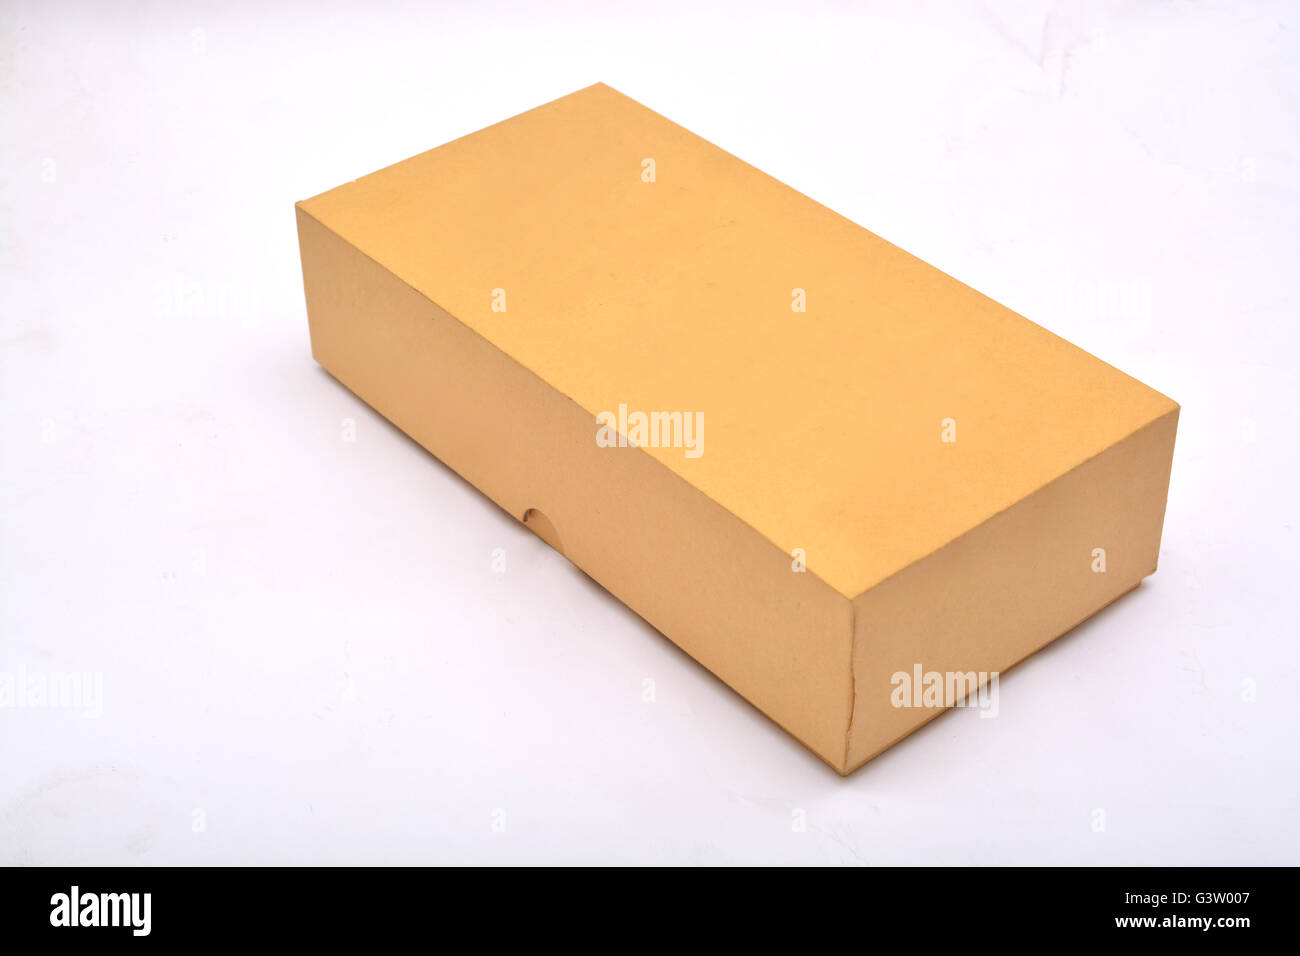 Closed cardboard box isolated on a white background. Stock Photo